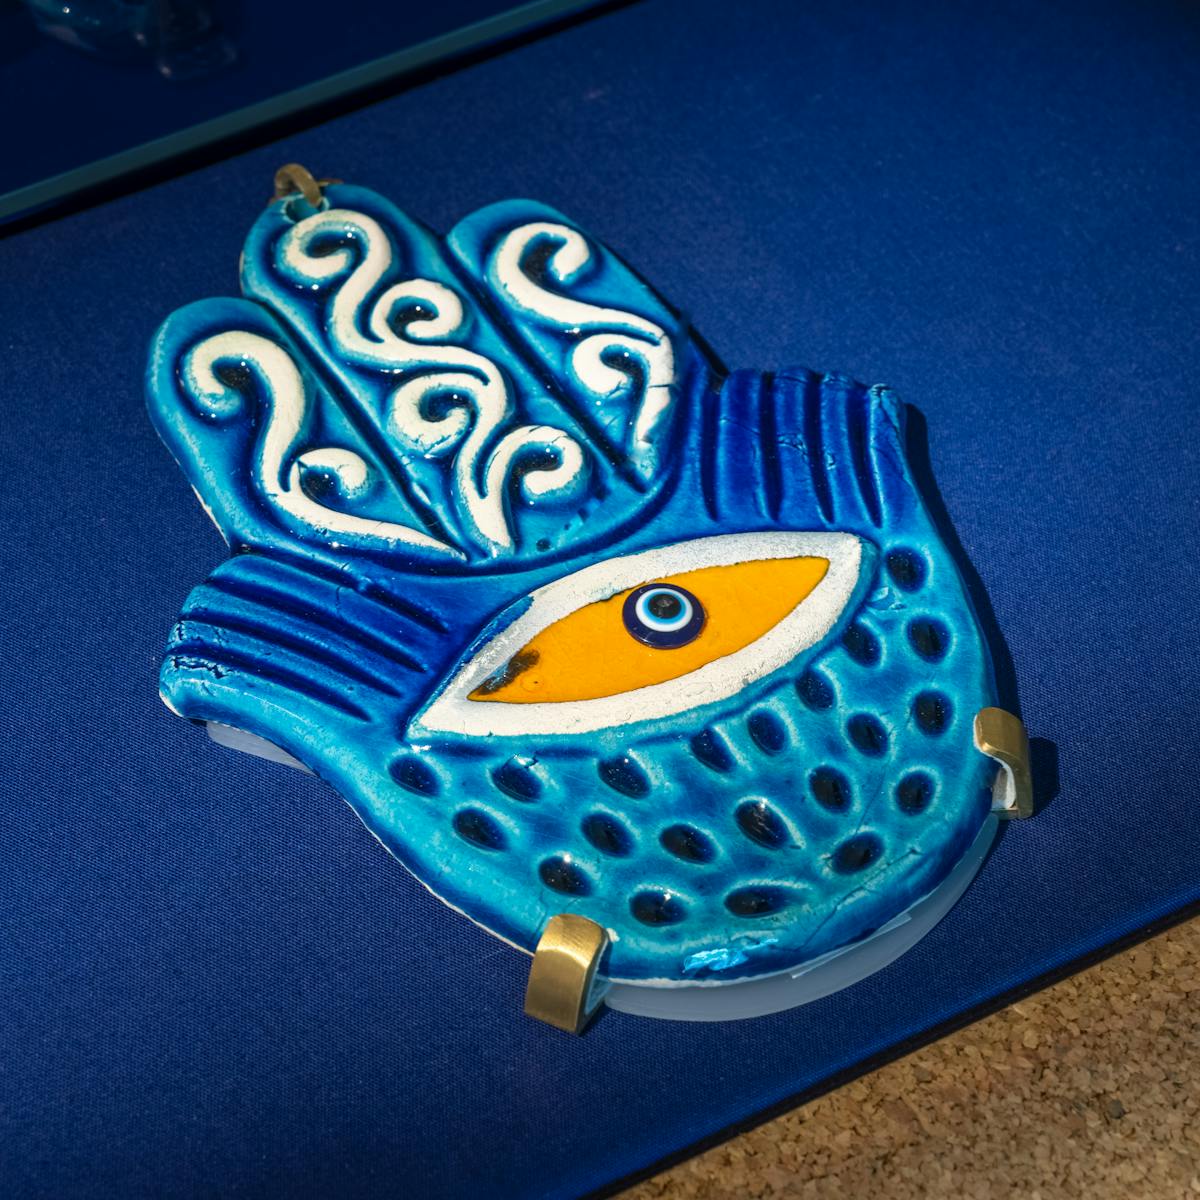 Vivid blue ceramic hand-shaped charm with a bright yellow eye in its palm. The surface of the hand is decorated with patterns of swirls, stripes and dots. 